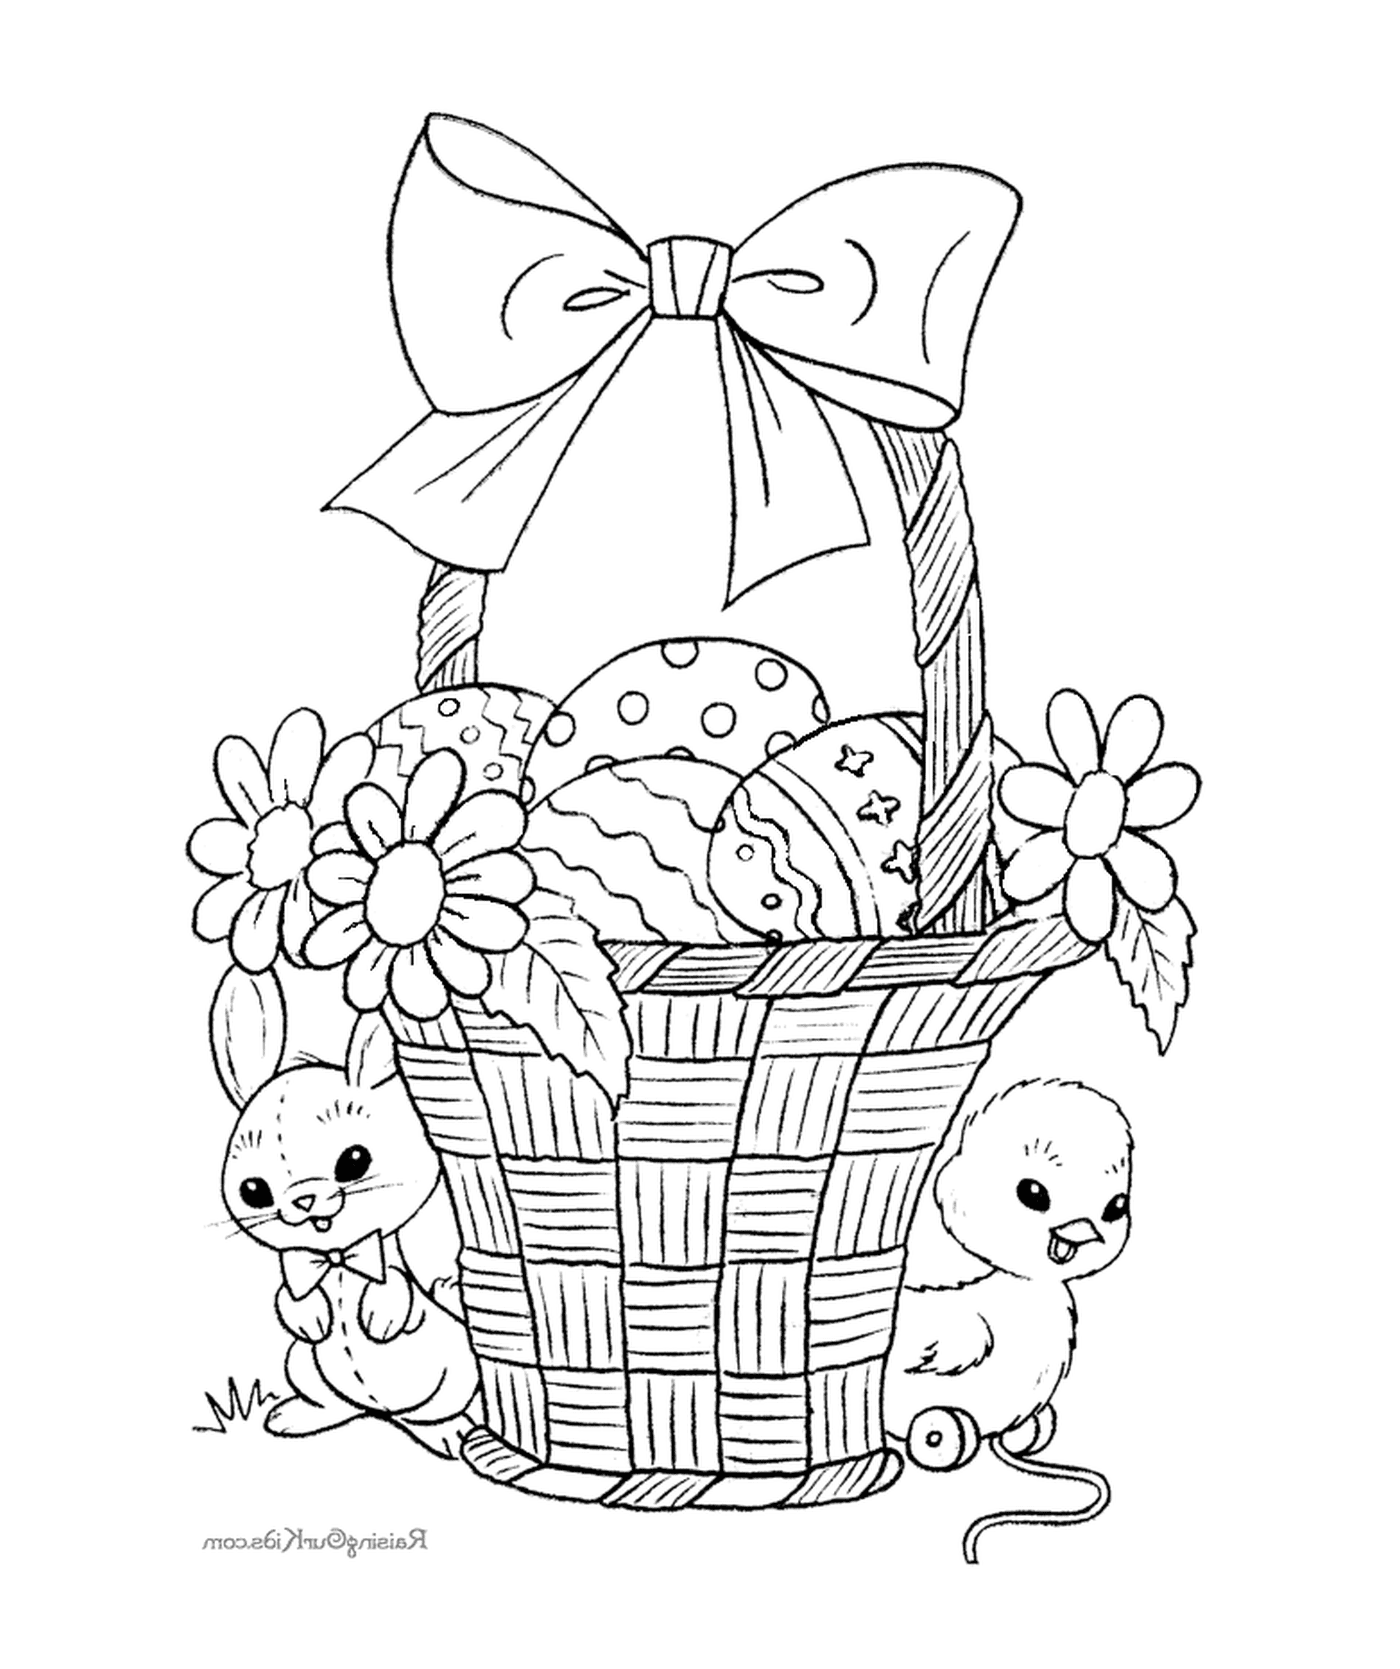  A basket filled with Easter eggs and rabbits 